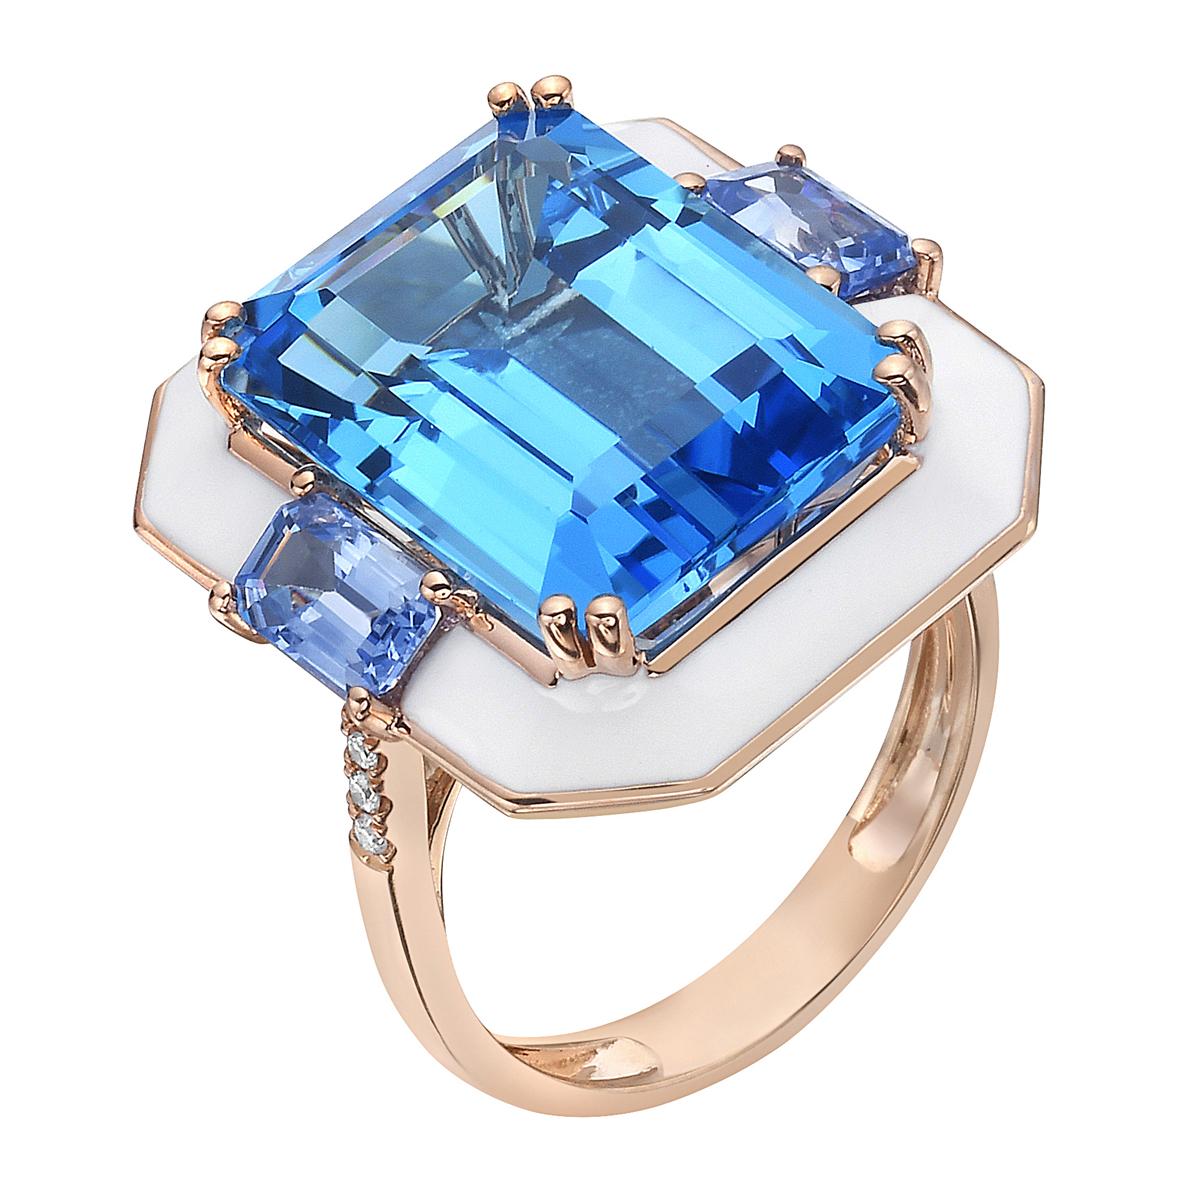 With this exquisite semi-precious swiss blue topaz rose gold diamond ring, style and glamour are in the spotlight. This 18-karat emerald cut ring is made from 5.29 grams of gold, 3 swiss blue topazes totaling 13.65 karats, and is surrounded by white